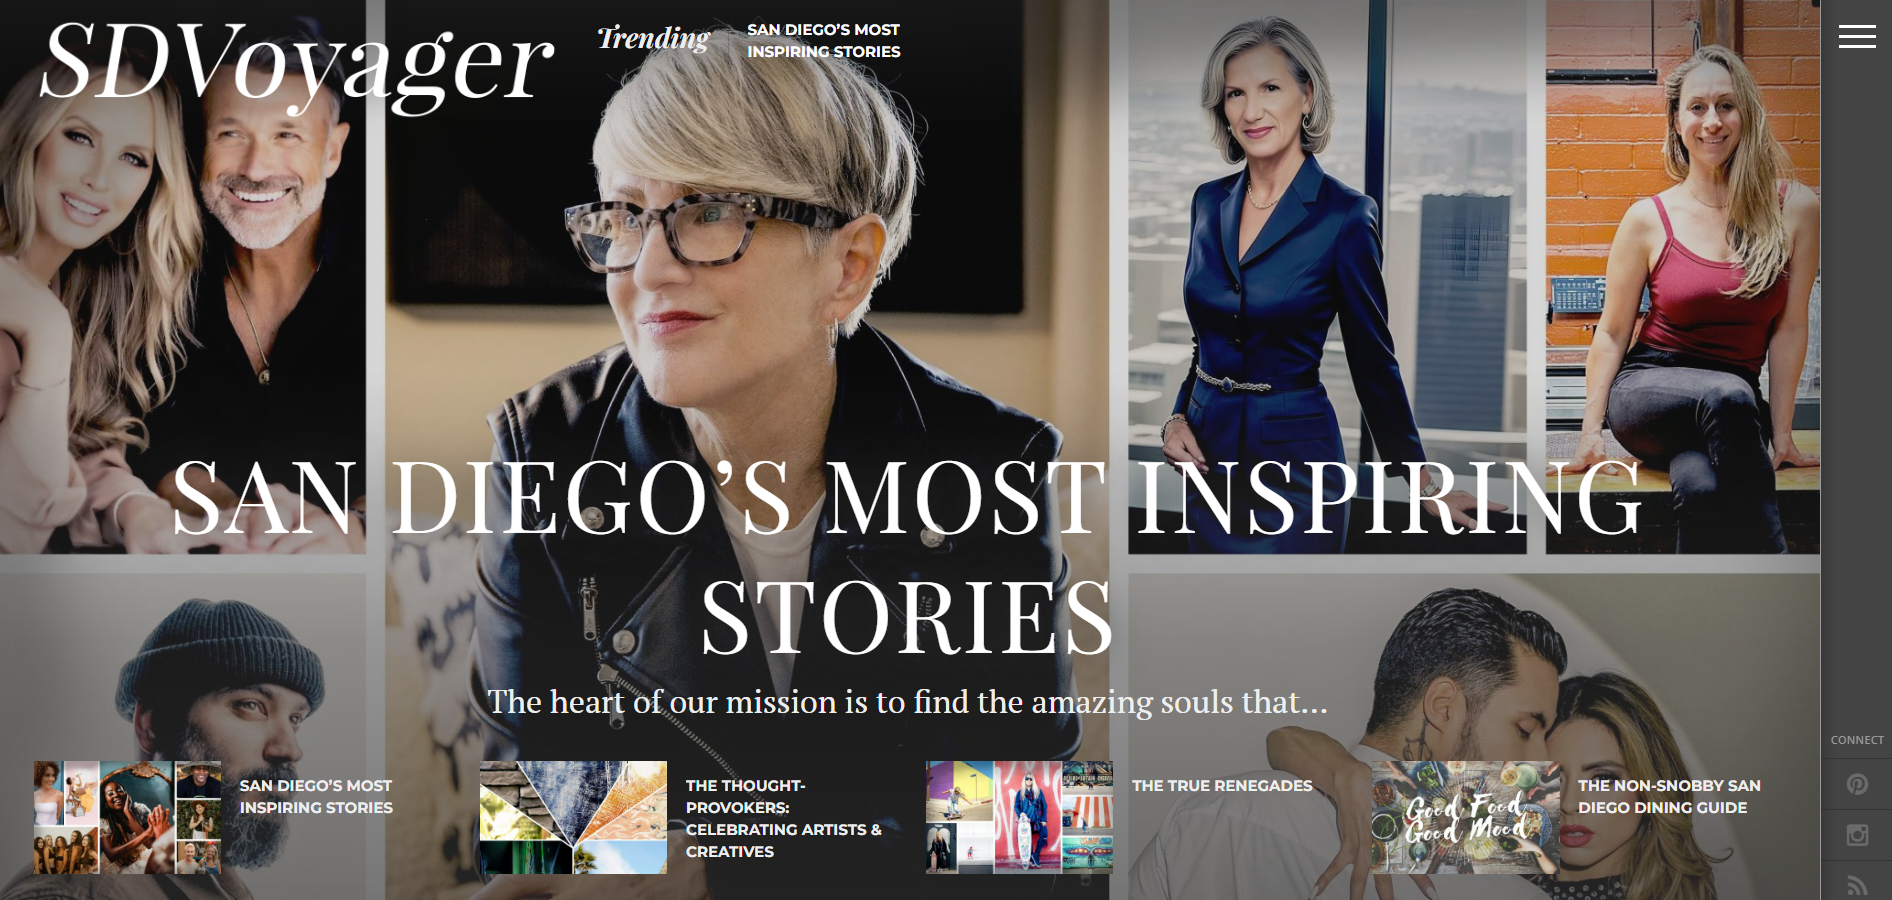 A woman wearing glasses is on the homepage of a website called san diego 's most inspiring stories.